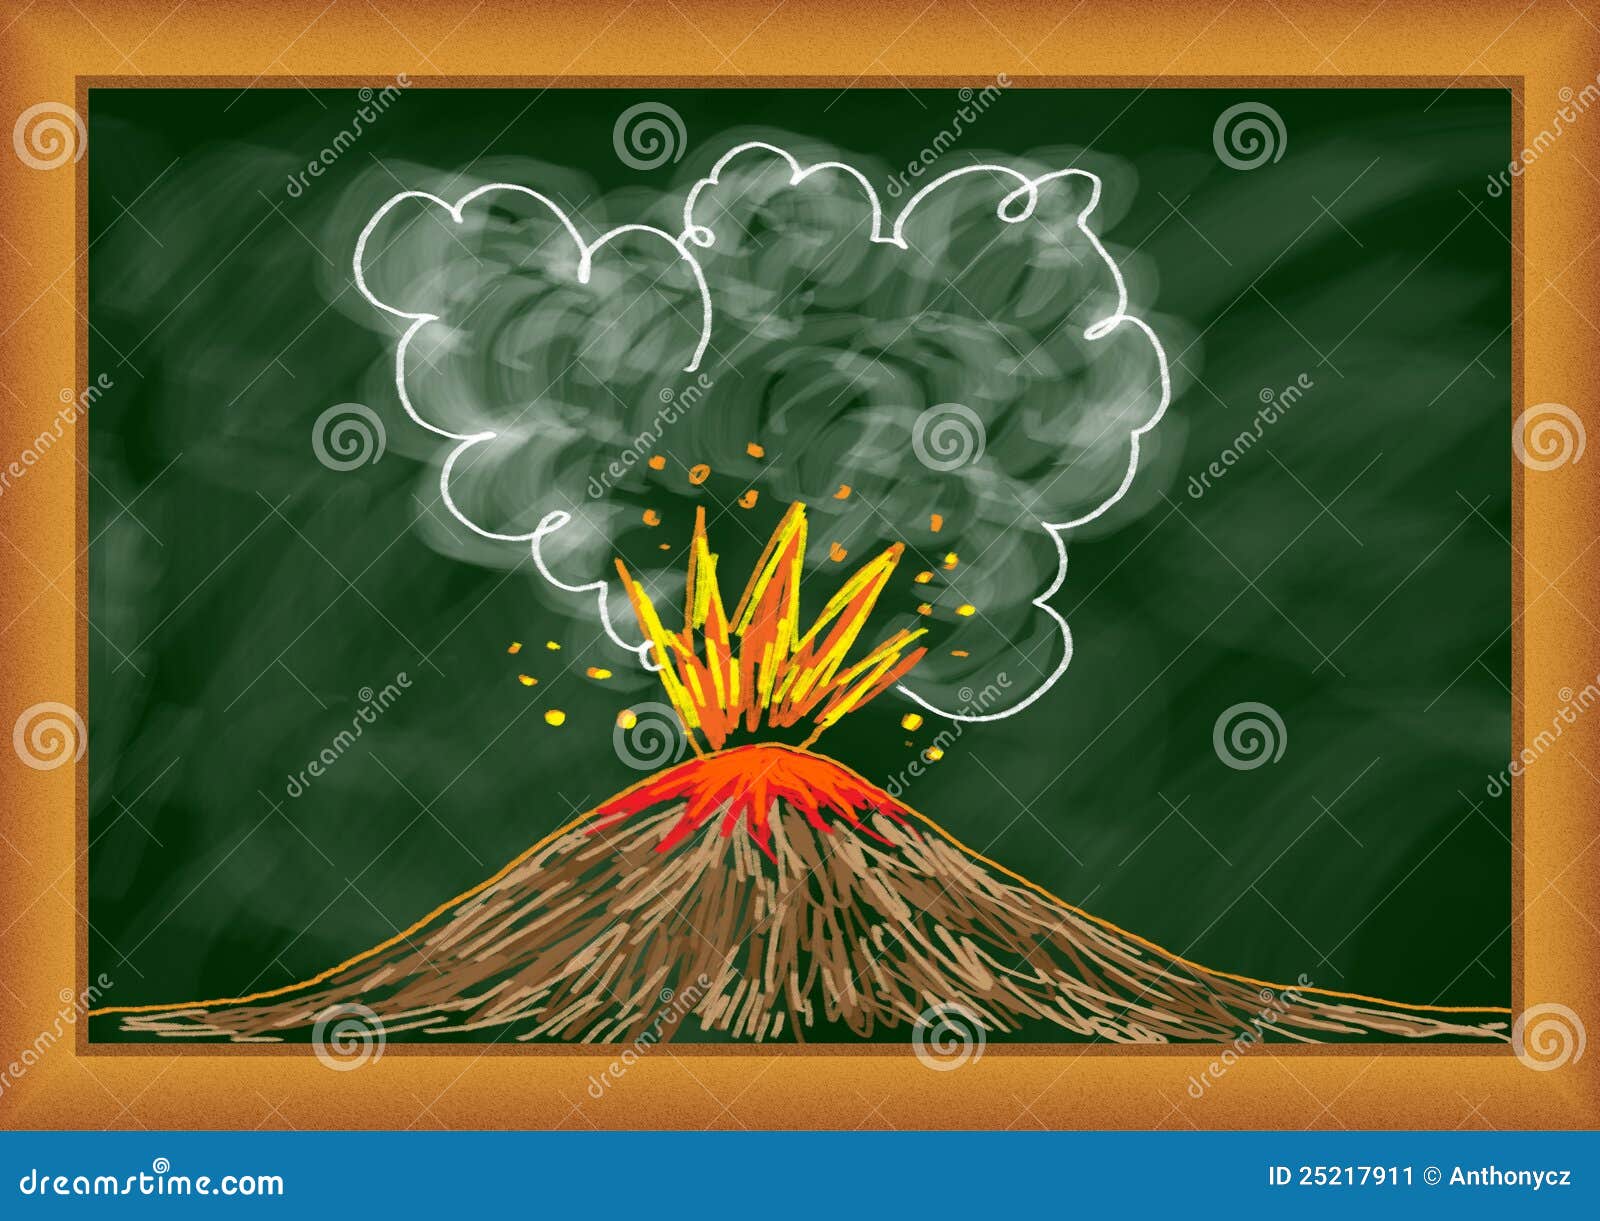 Drawing Of Volcano Stock Image - Image: 25217911